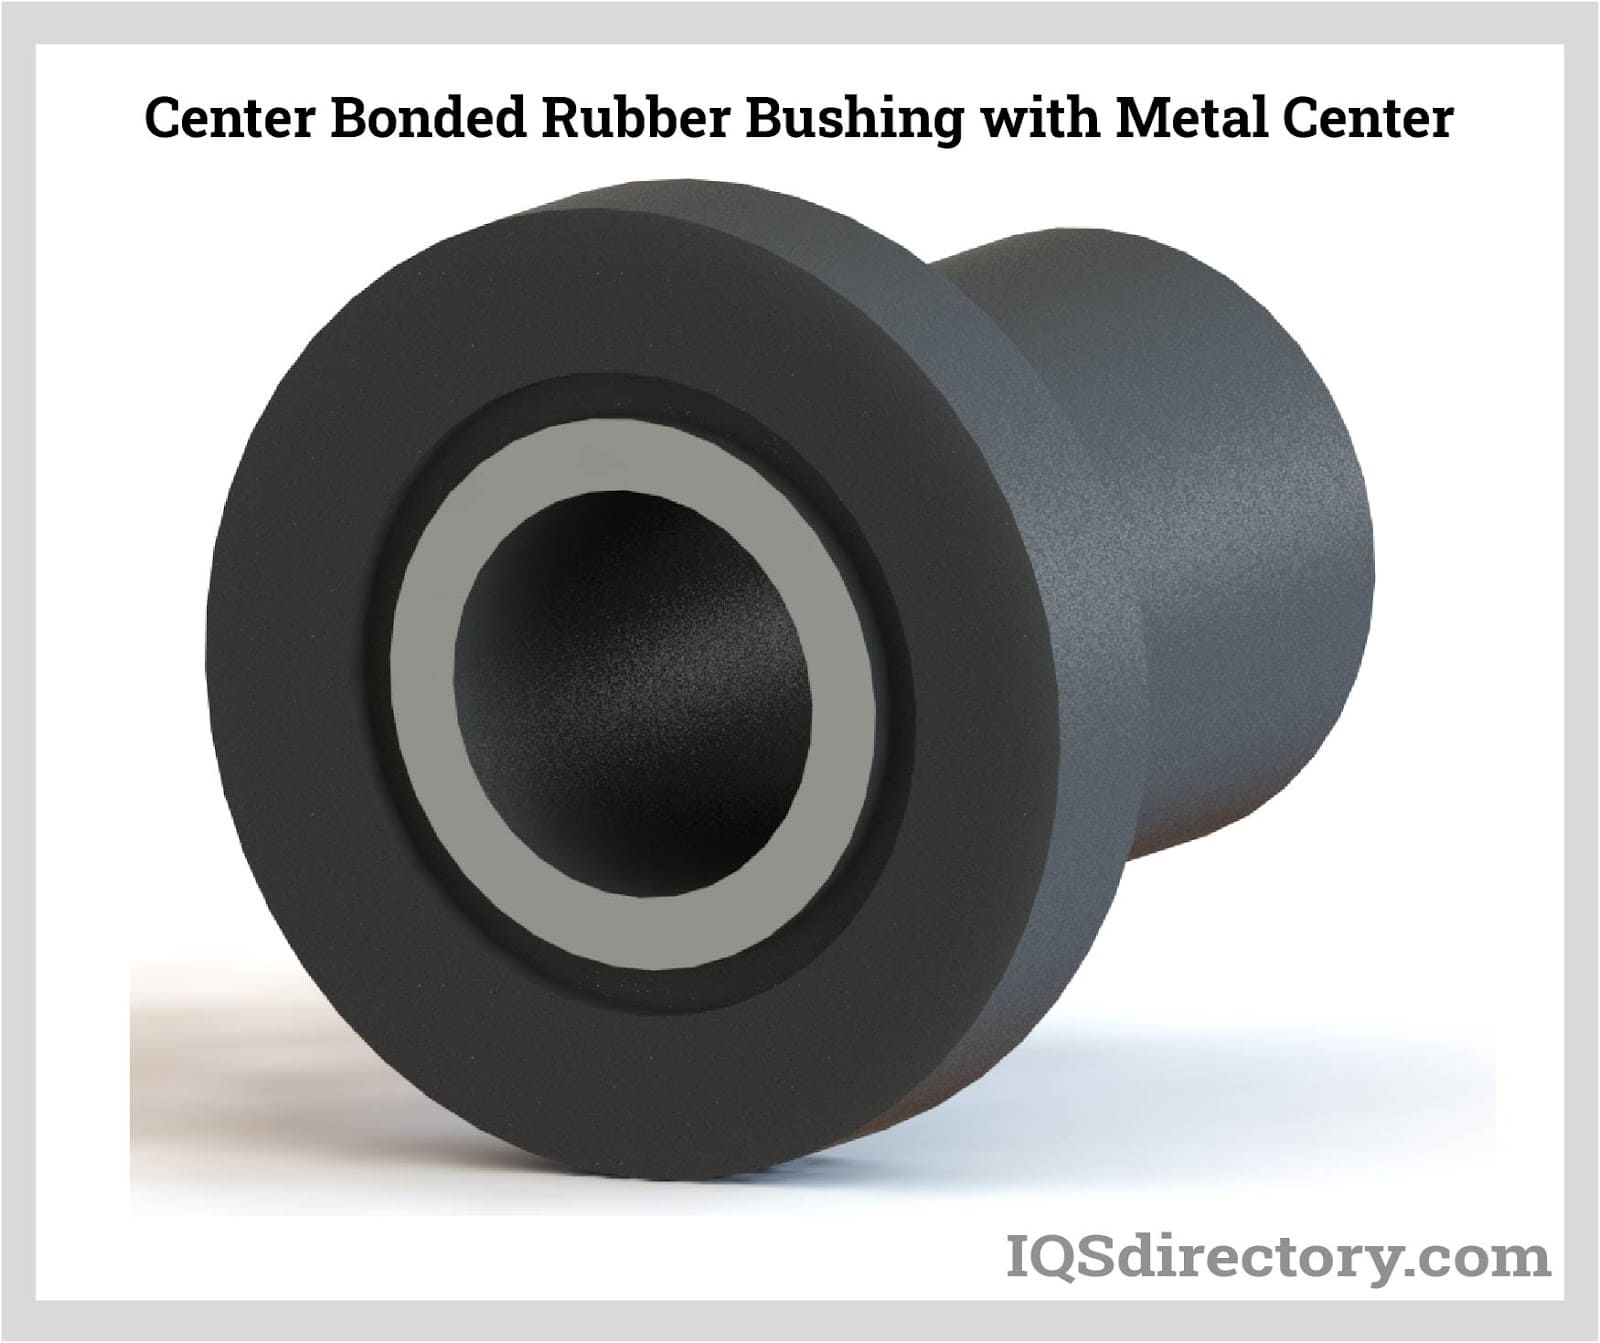 Center Bonded Rubber Bushing with Metal Center